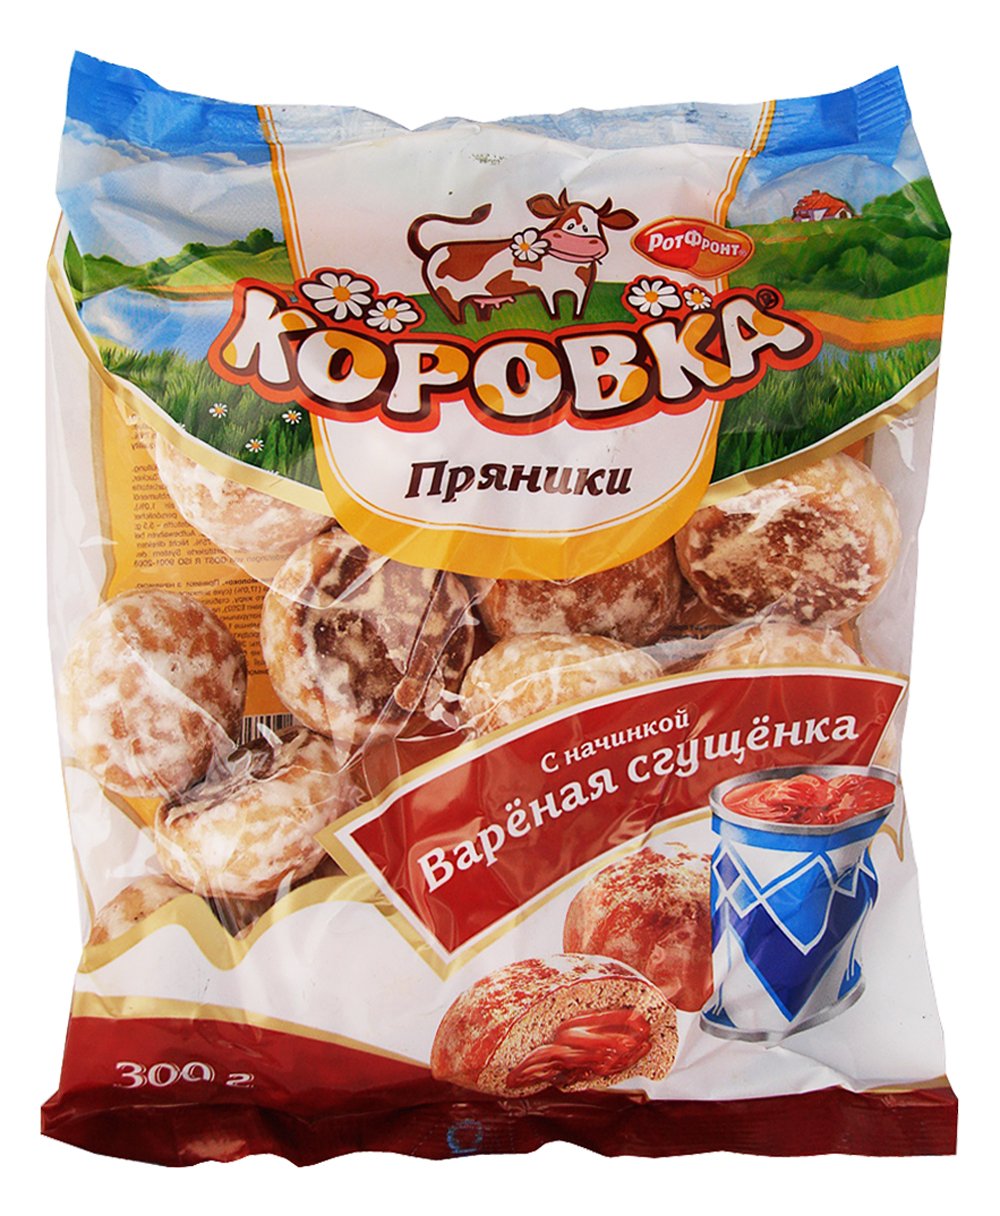 Imported Russian Gingerbread "Korovka" with Condensed milk Filling